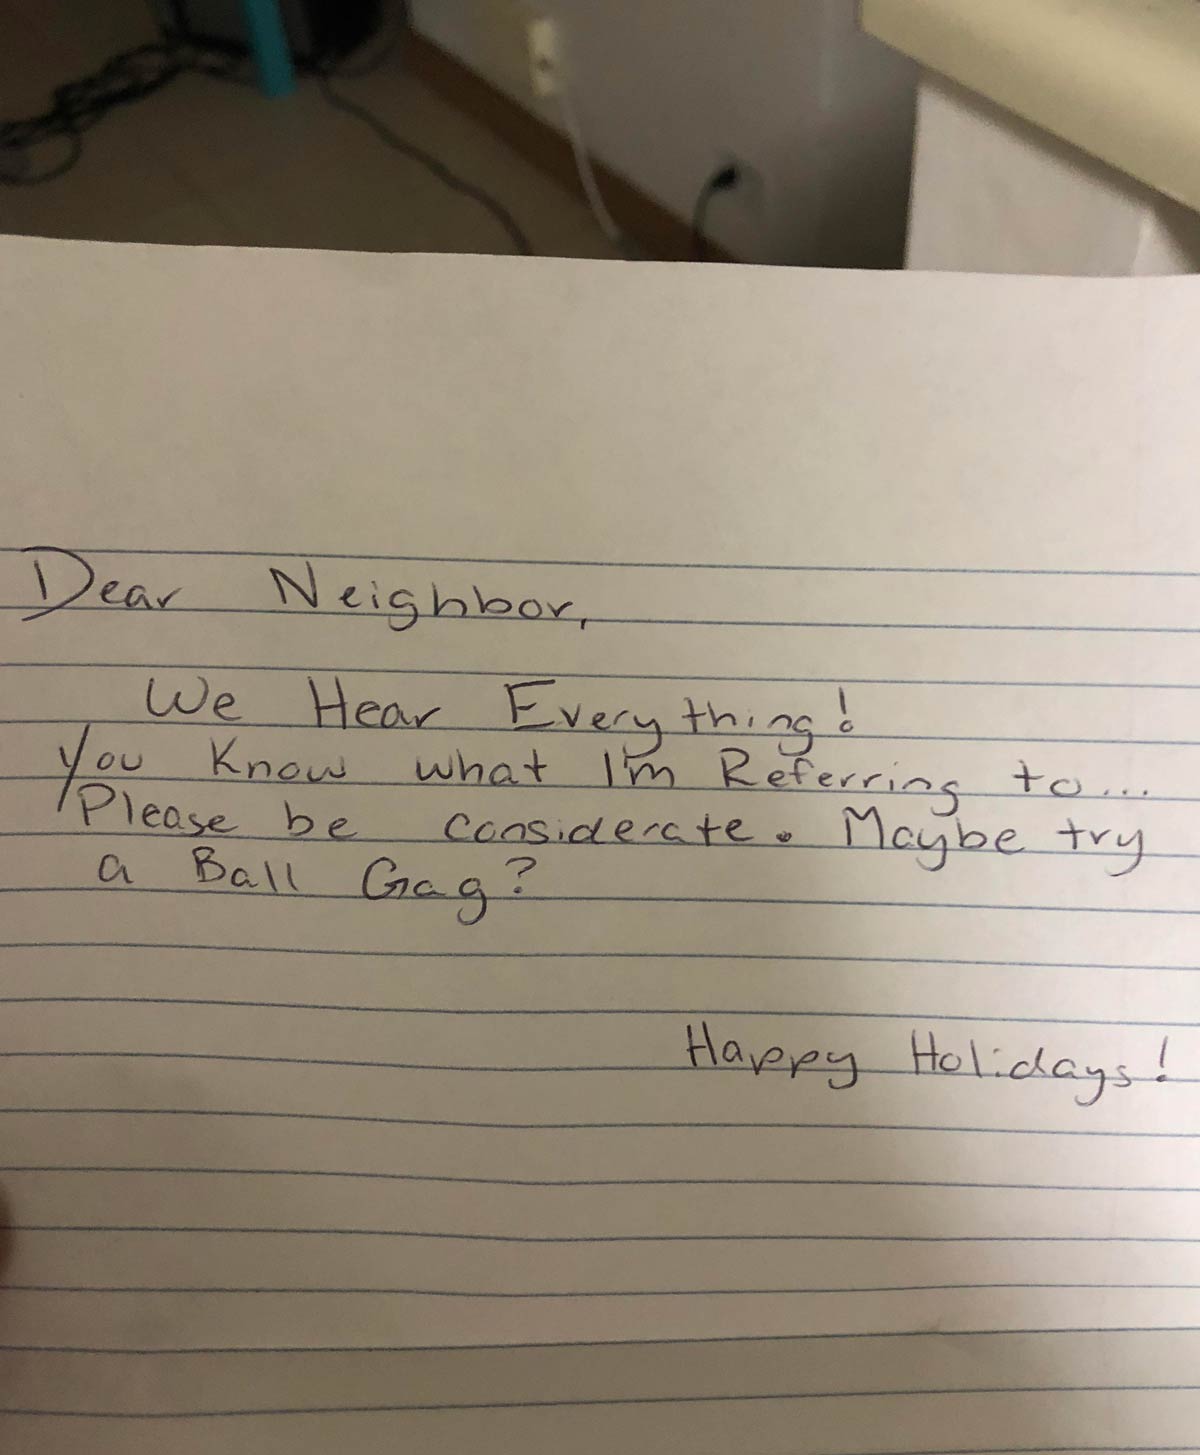 This note that someone taped to my friend’s front door